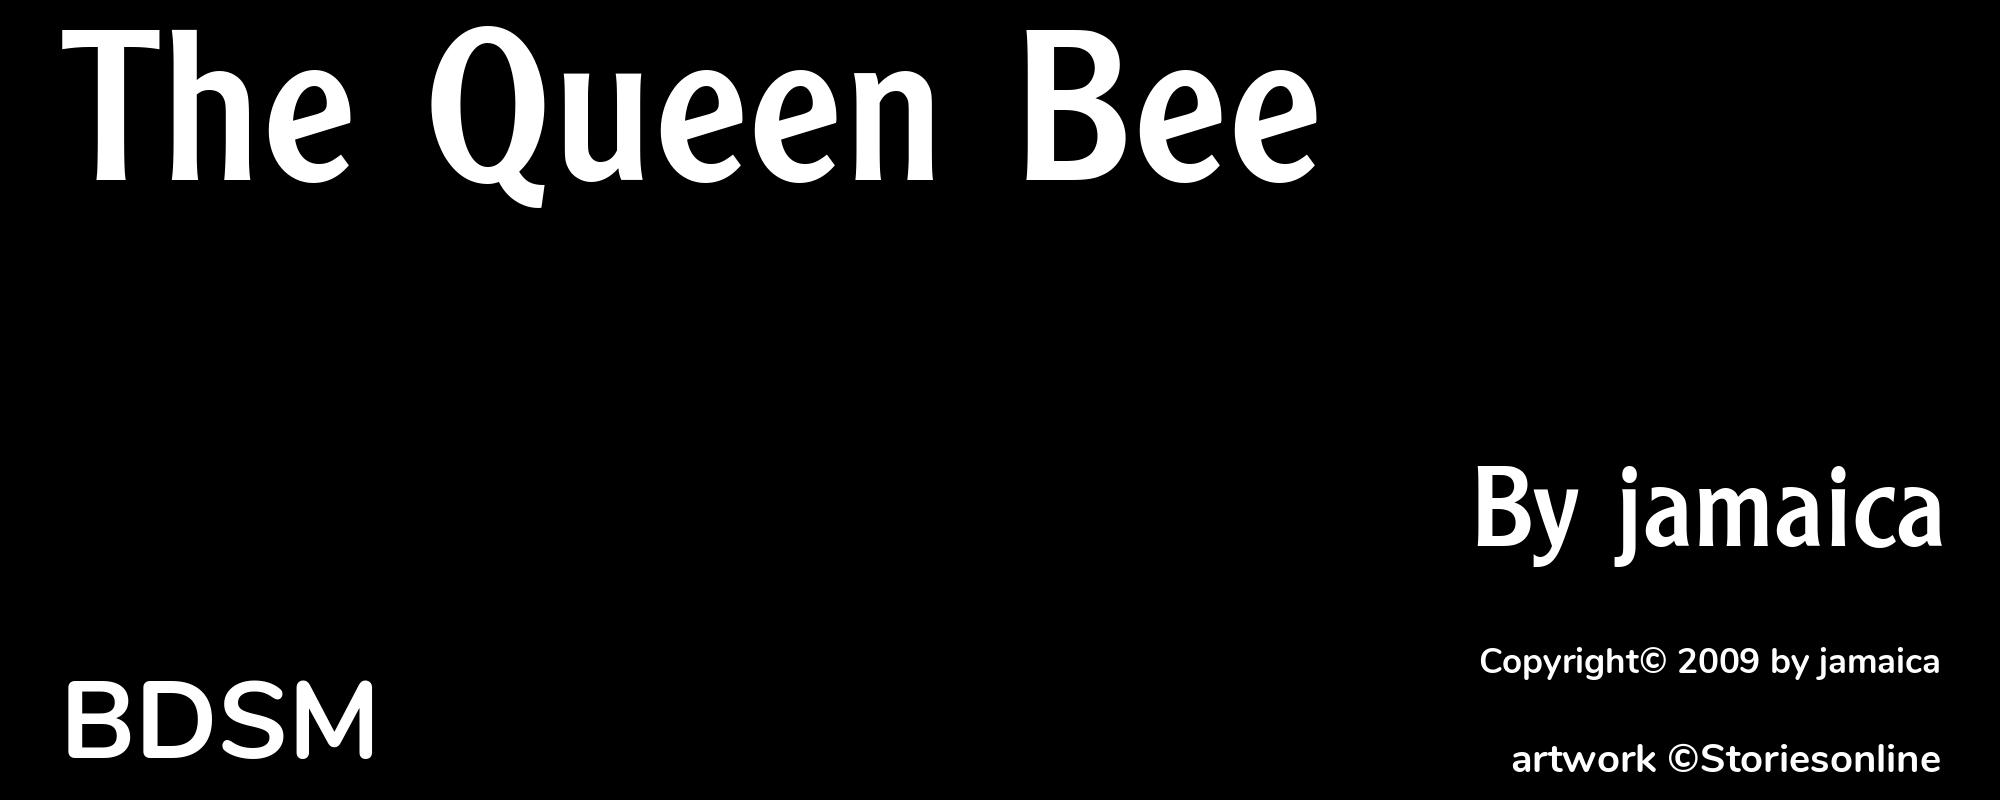 The Queen Bee - Cover